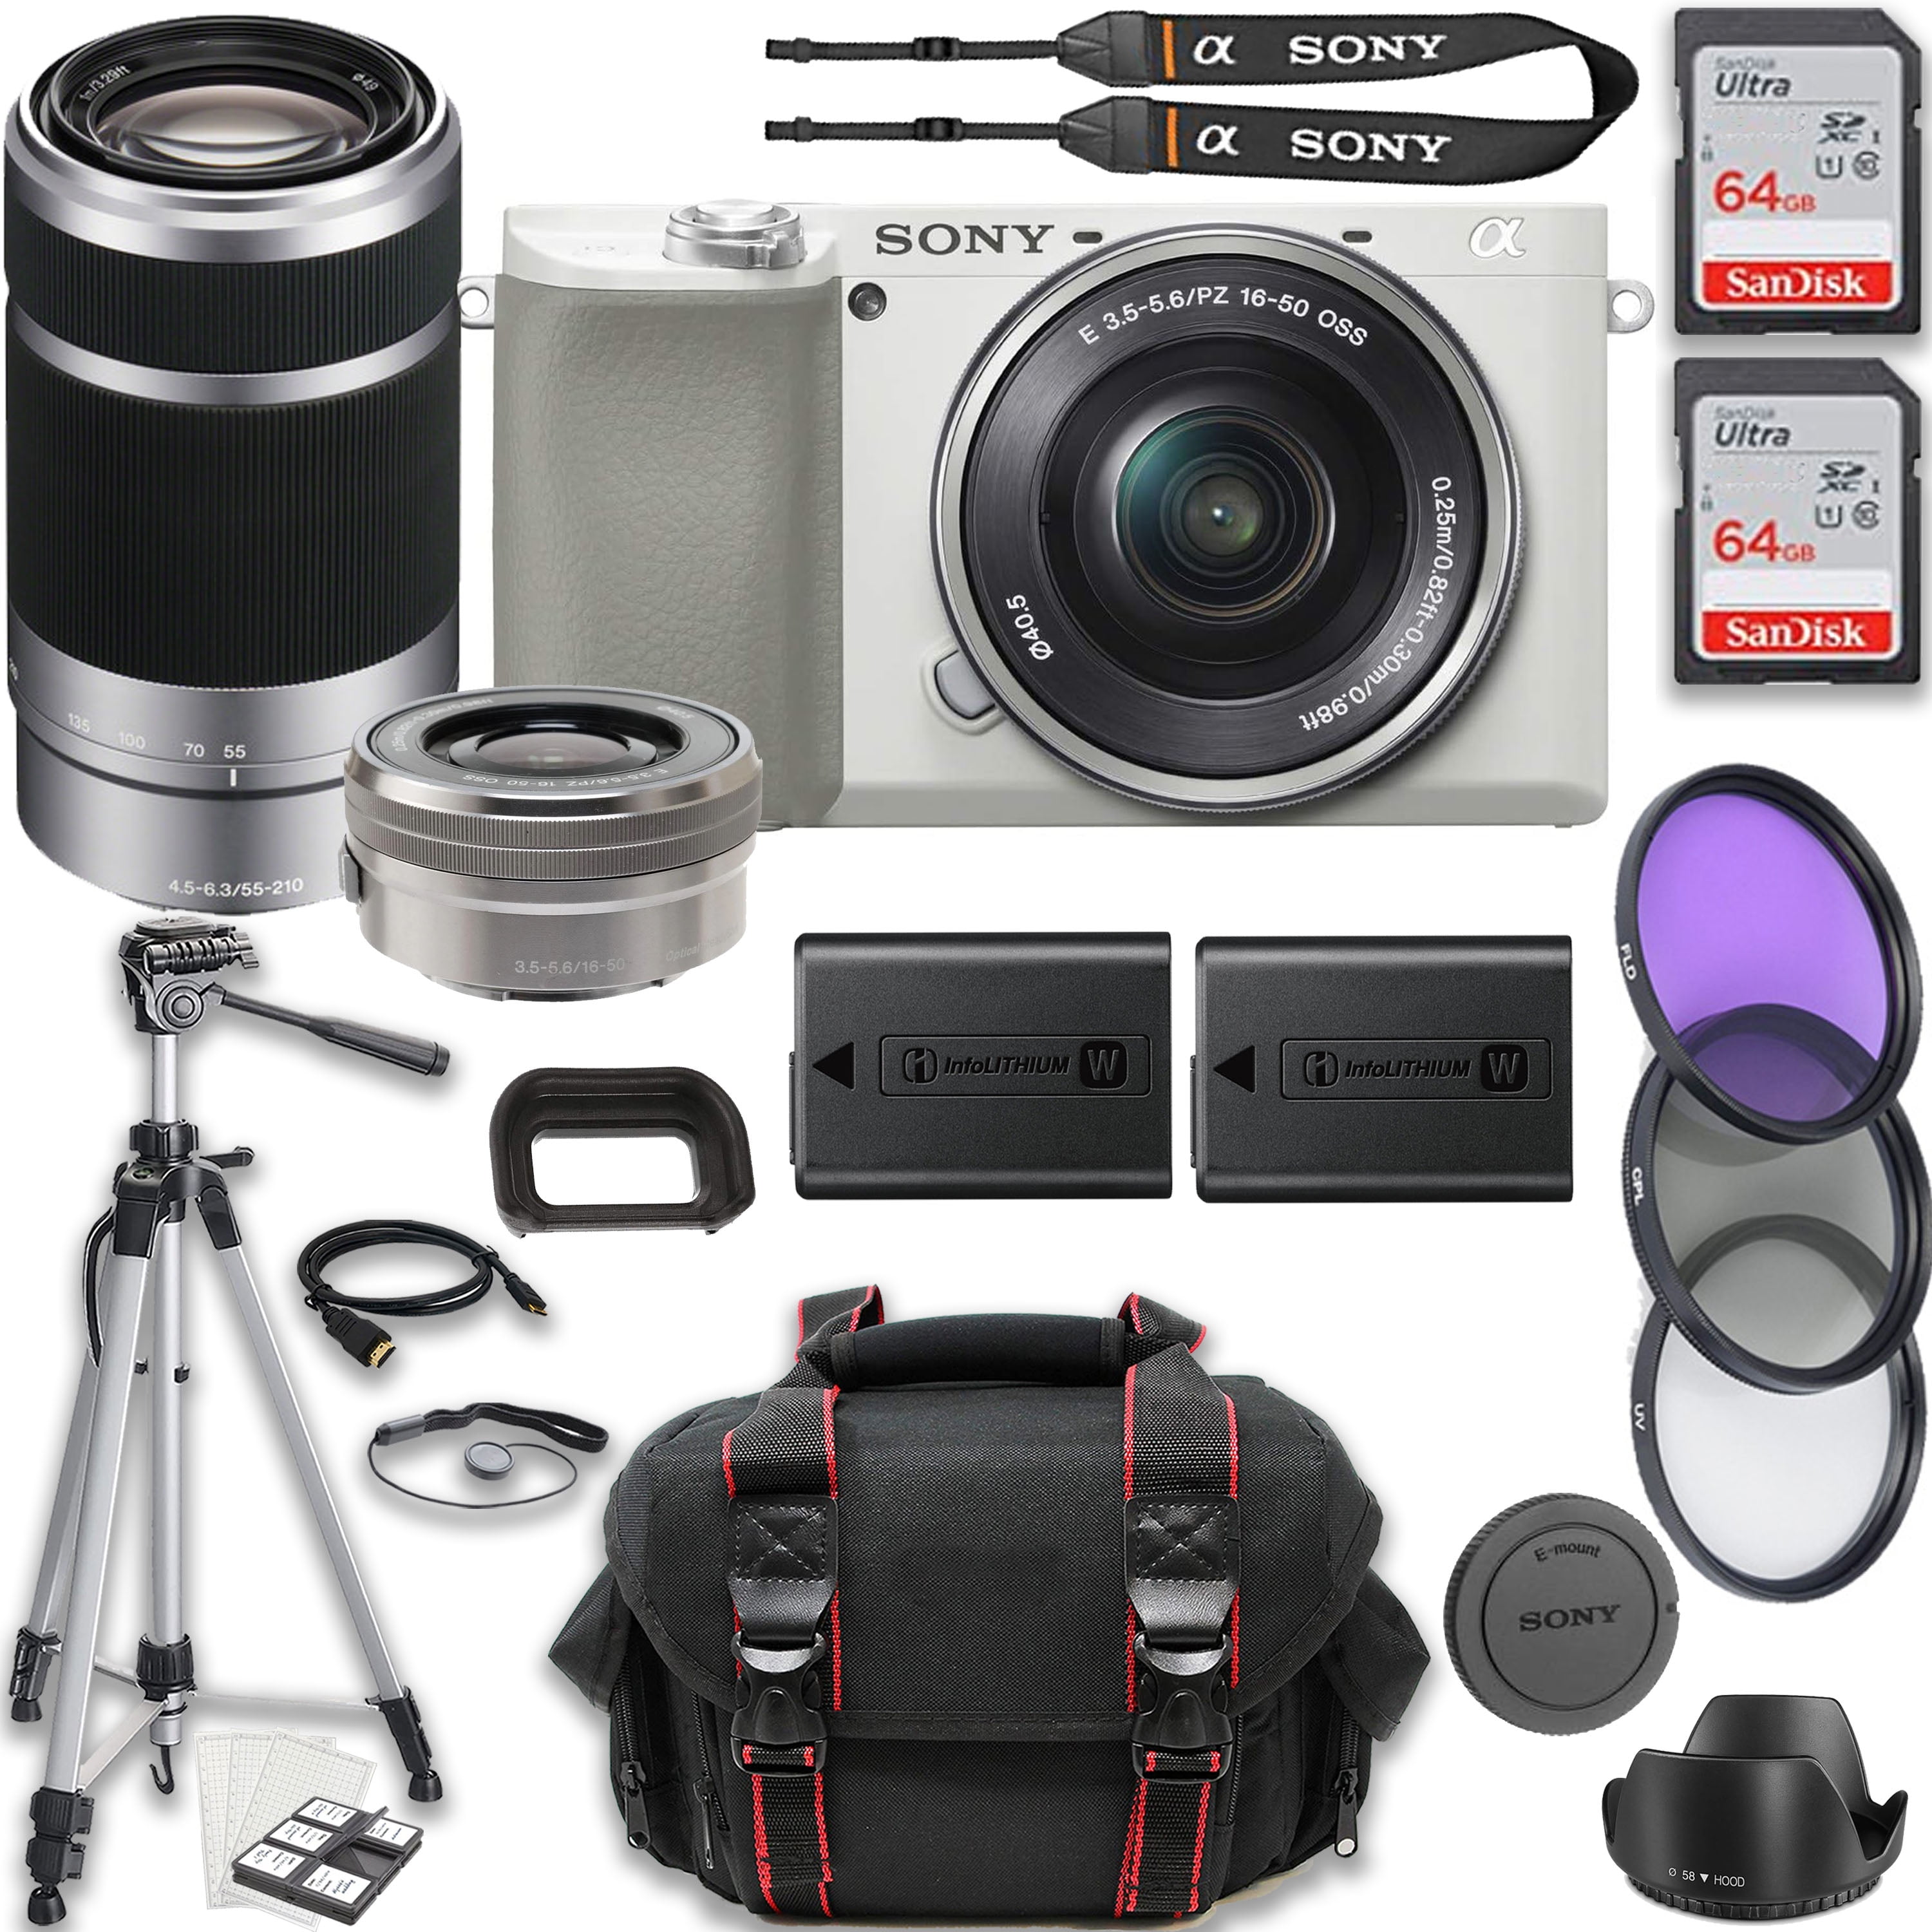 Sony a6100 Mirrorless Camera with 16-50mm and 55-210mm Lenses (White)  (ILCE6100Y/W) + Filter Kit + 64GB Card + NPF-W50 Battery + Card Reader +  Corel